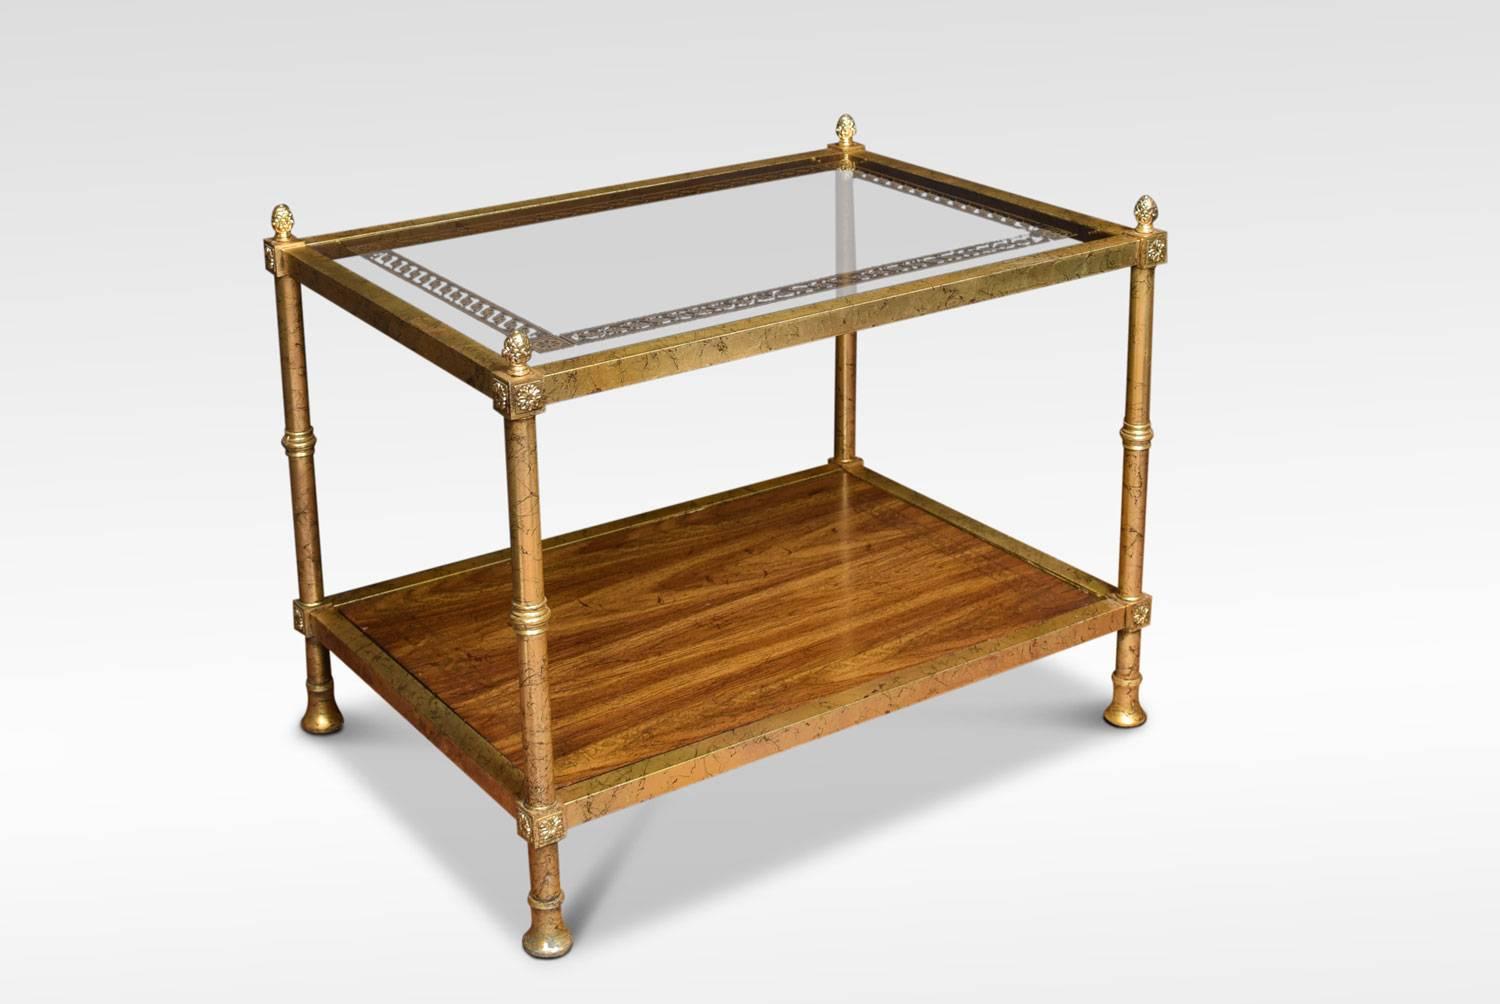 A brass and glass coffee table in the manner of Maison Jansen, with glass top with scrolling gilded decoration. Set within a brass frame, the legs headed by acorn finials and join by under-tier.
Dimensions:
Height 22.5 inches
Width 28.5